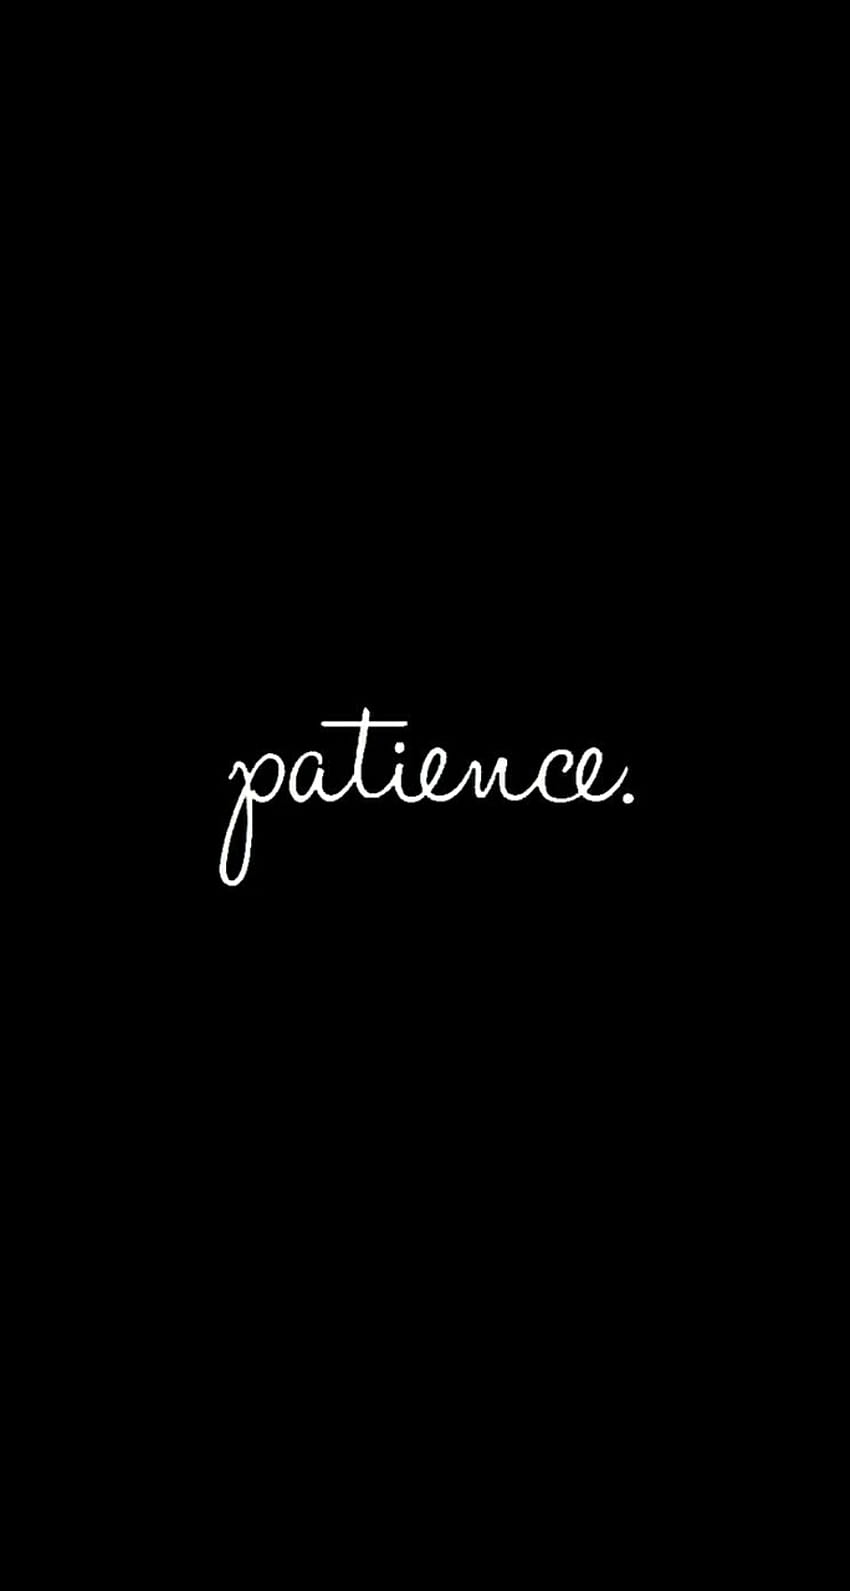 Patience for iPhone or Android, patience iphone HD phone wallpaper